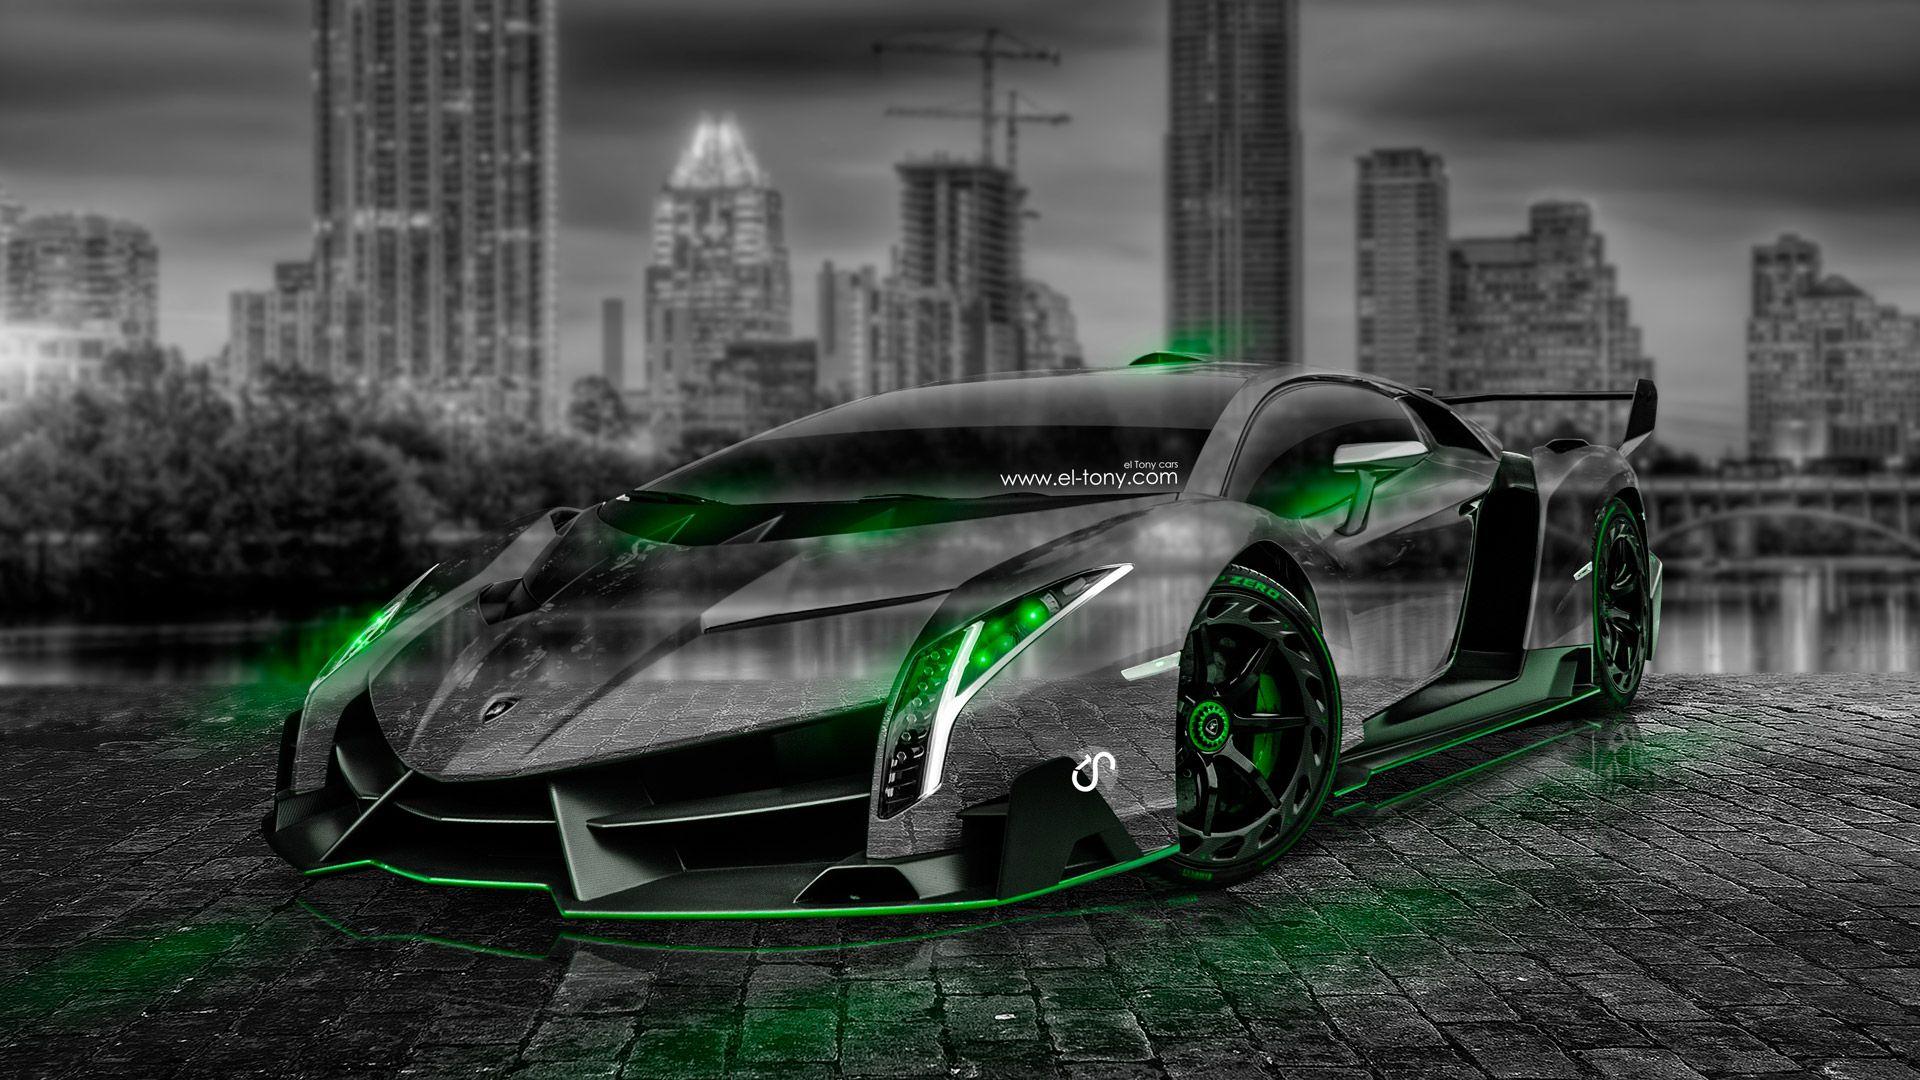 Neon Supercars Wallpapers - Top Free Neon Supercars Backgrounds